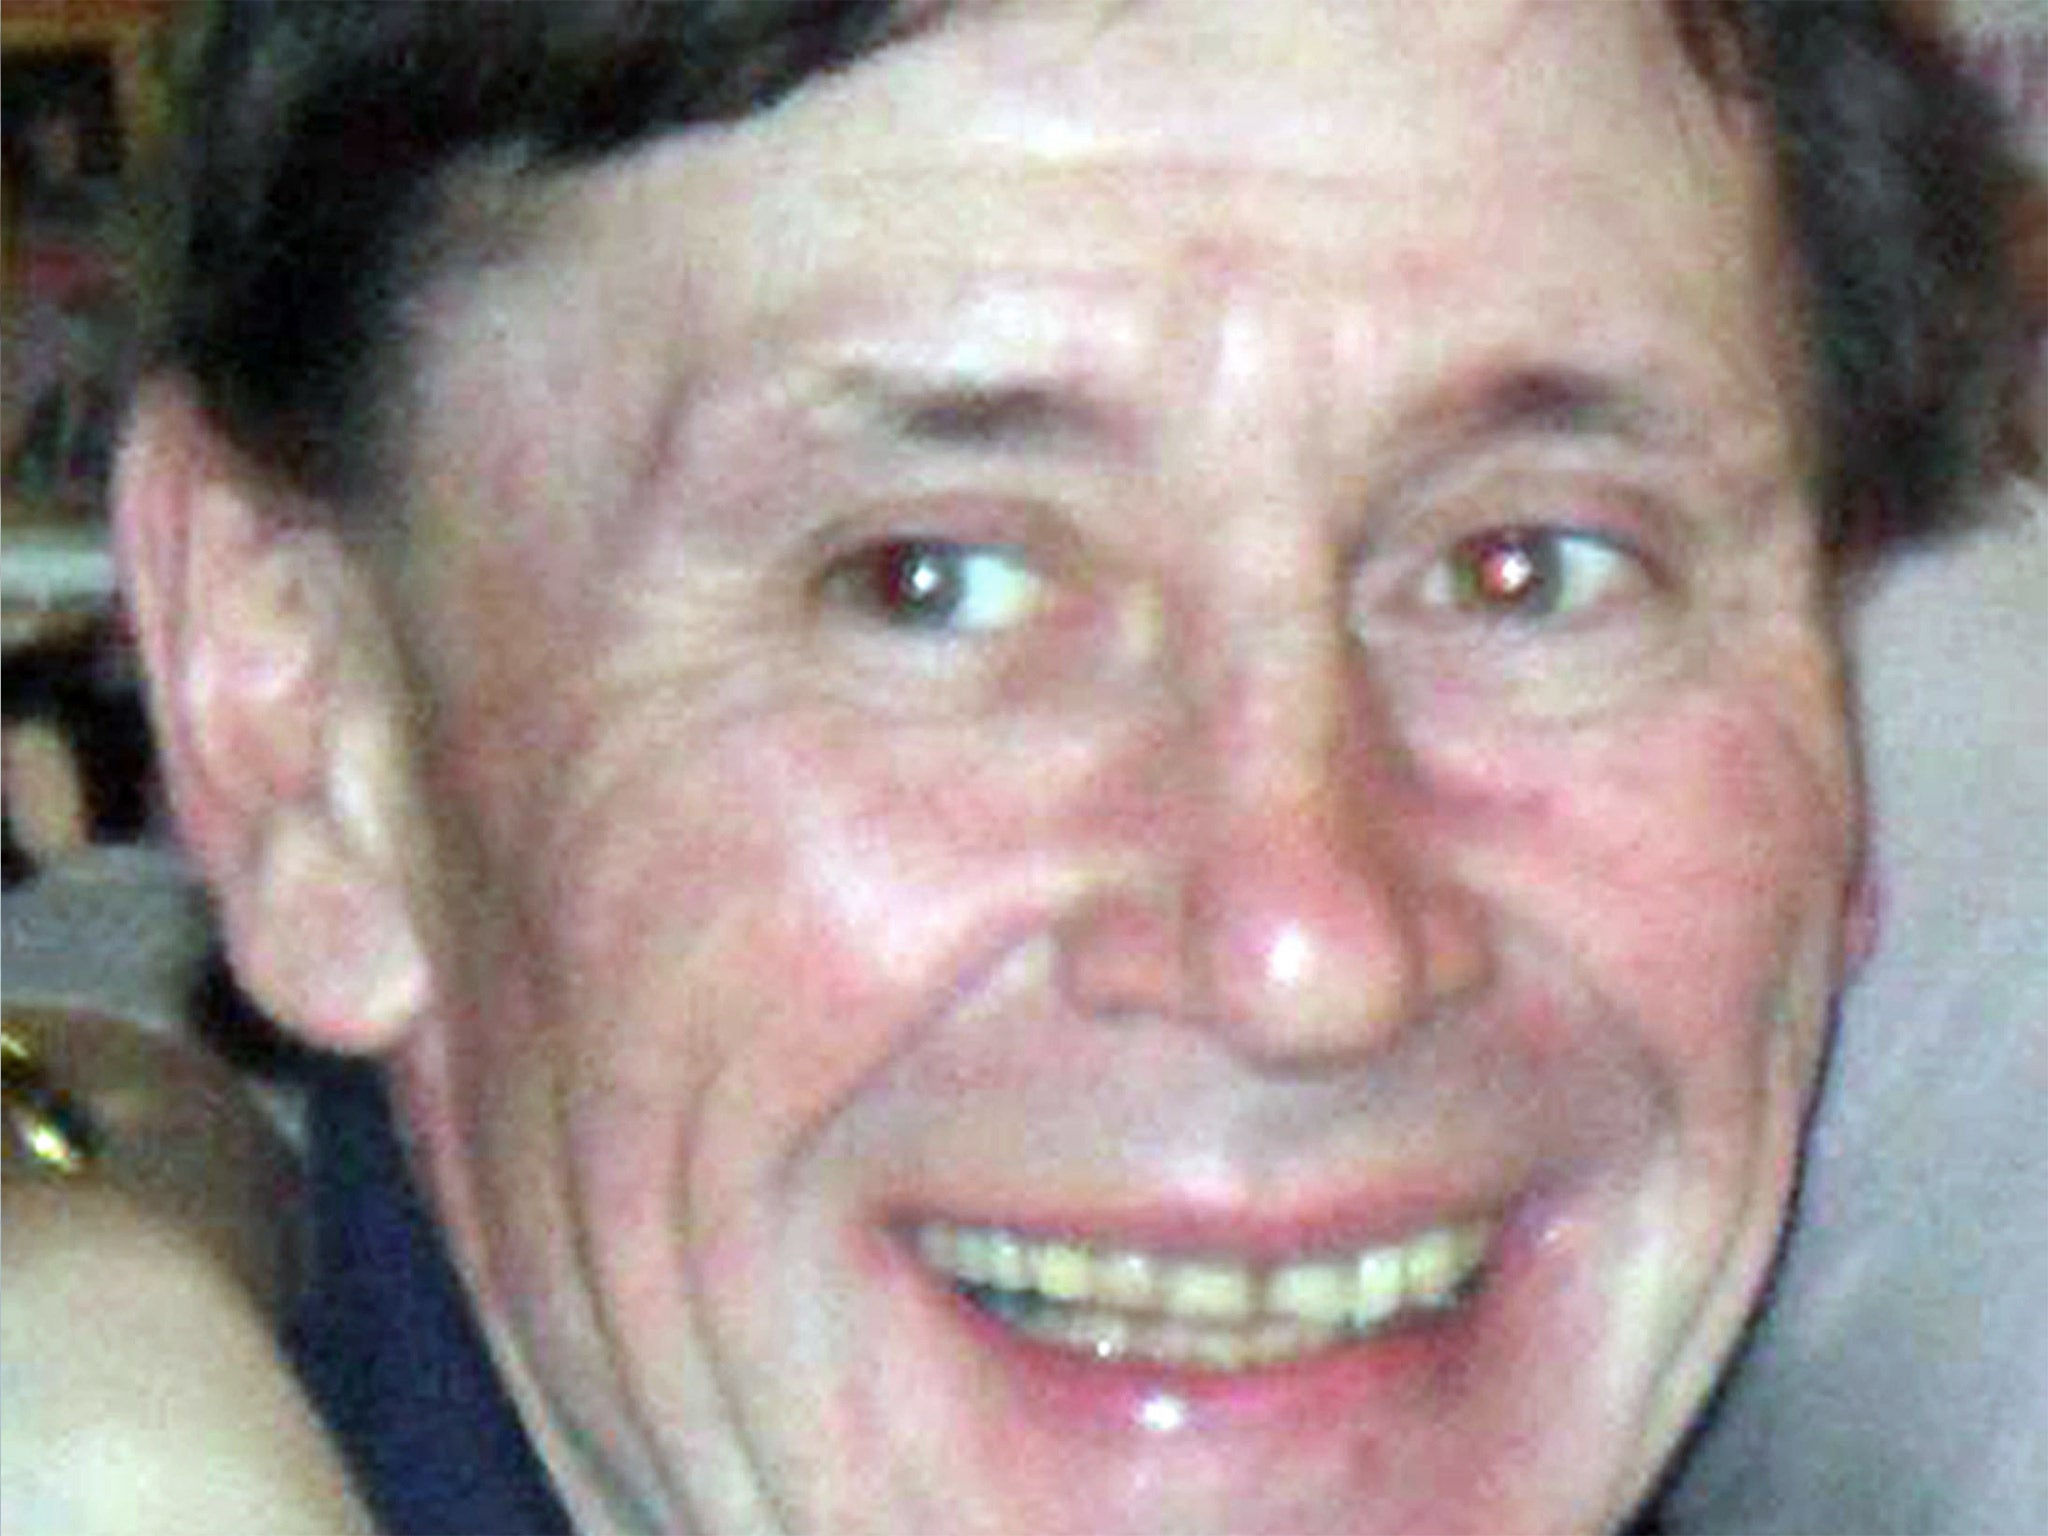 Christopher John Barry was murdered outside his home in Edmonton Green, London